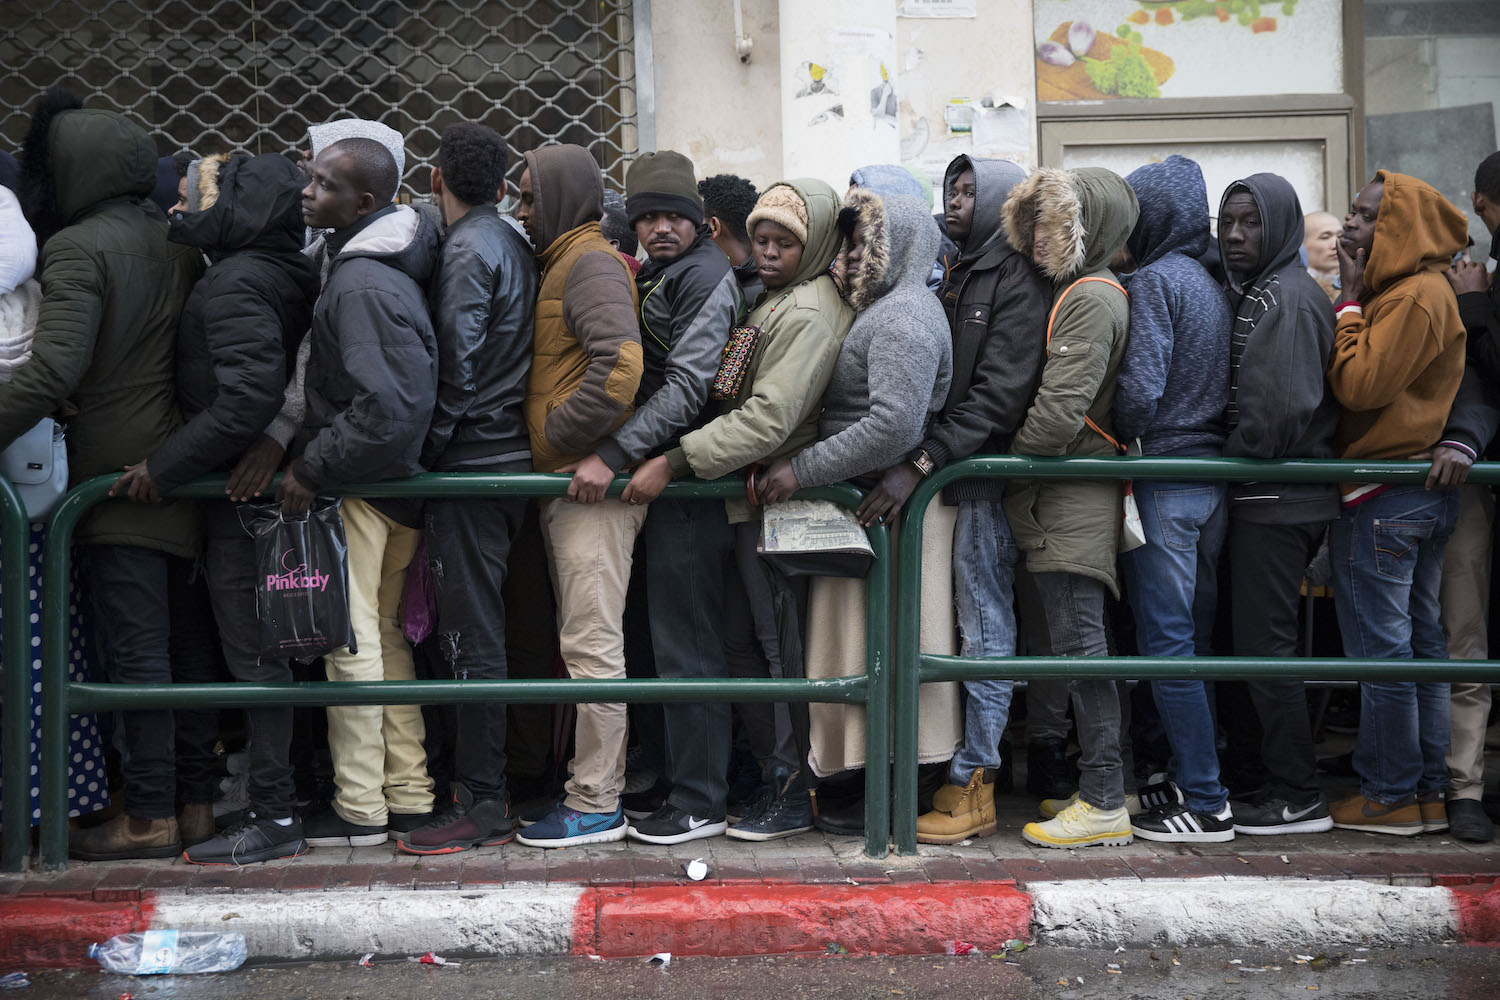 Asylum seekers, mostly from Sudan and Eritrea, wait outside the Interior Ministry in order to submit their asylum requests, south Tel Aviv, January 15, 2018. Many arrive at night, ahead of the opening, and spend hours standing in line in order to get in as soon as possible. (Oren Ziv)